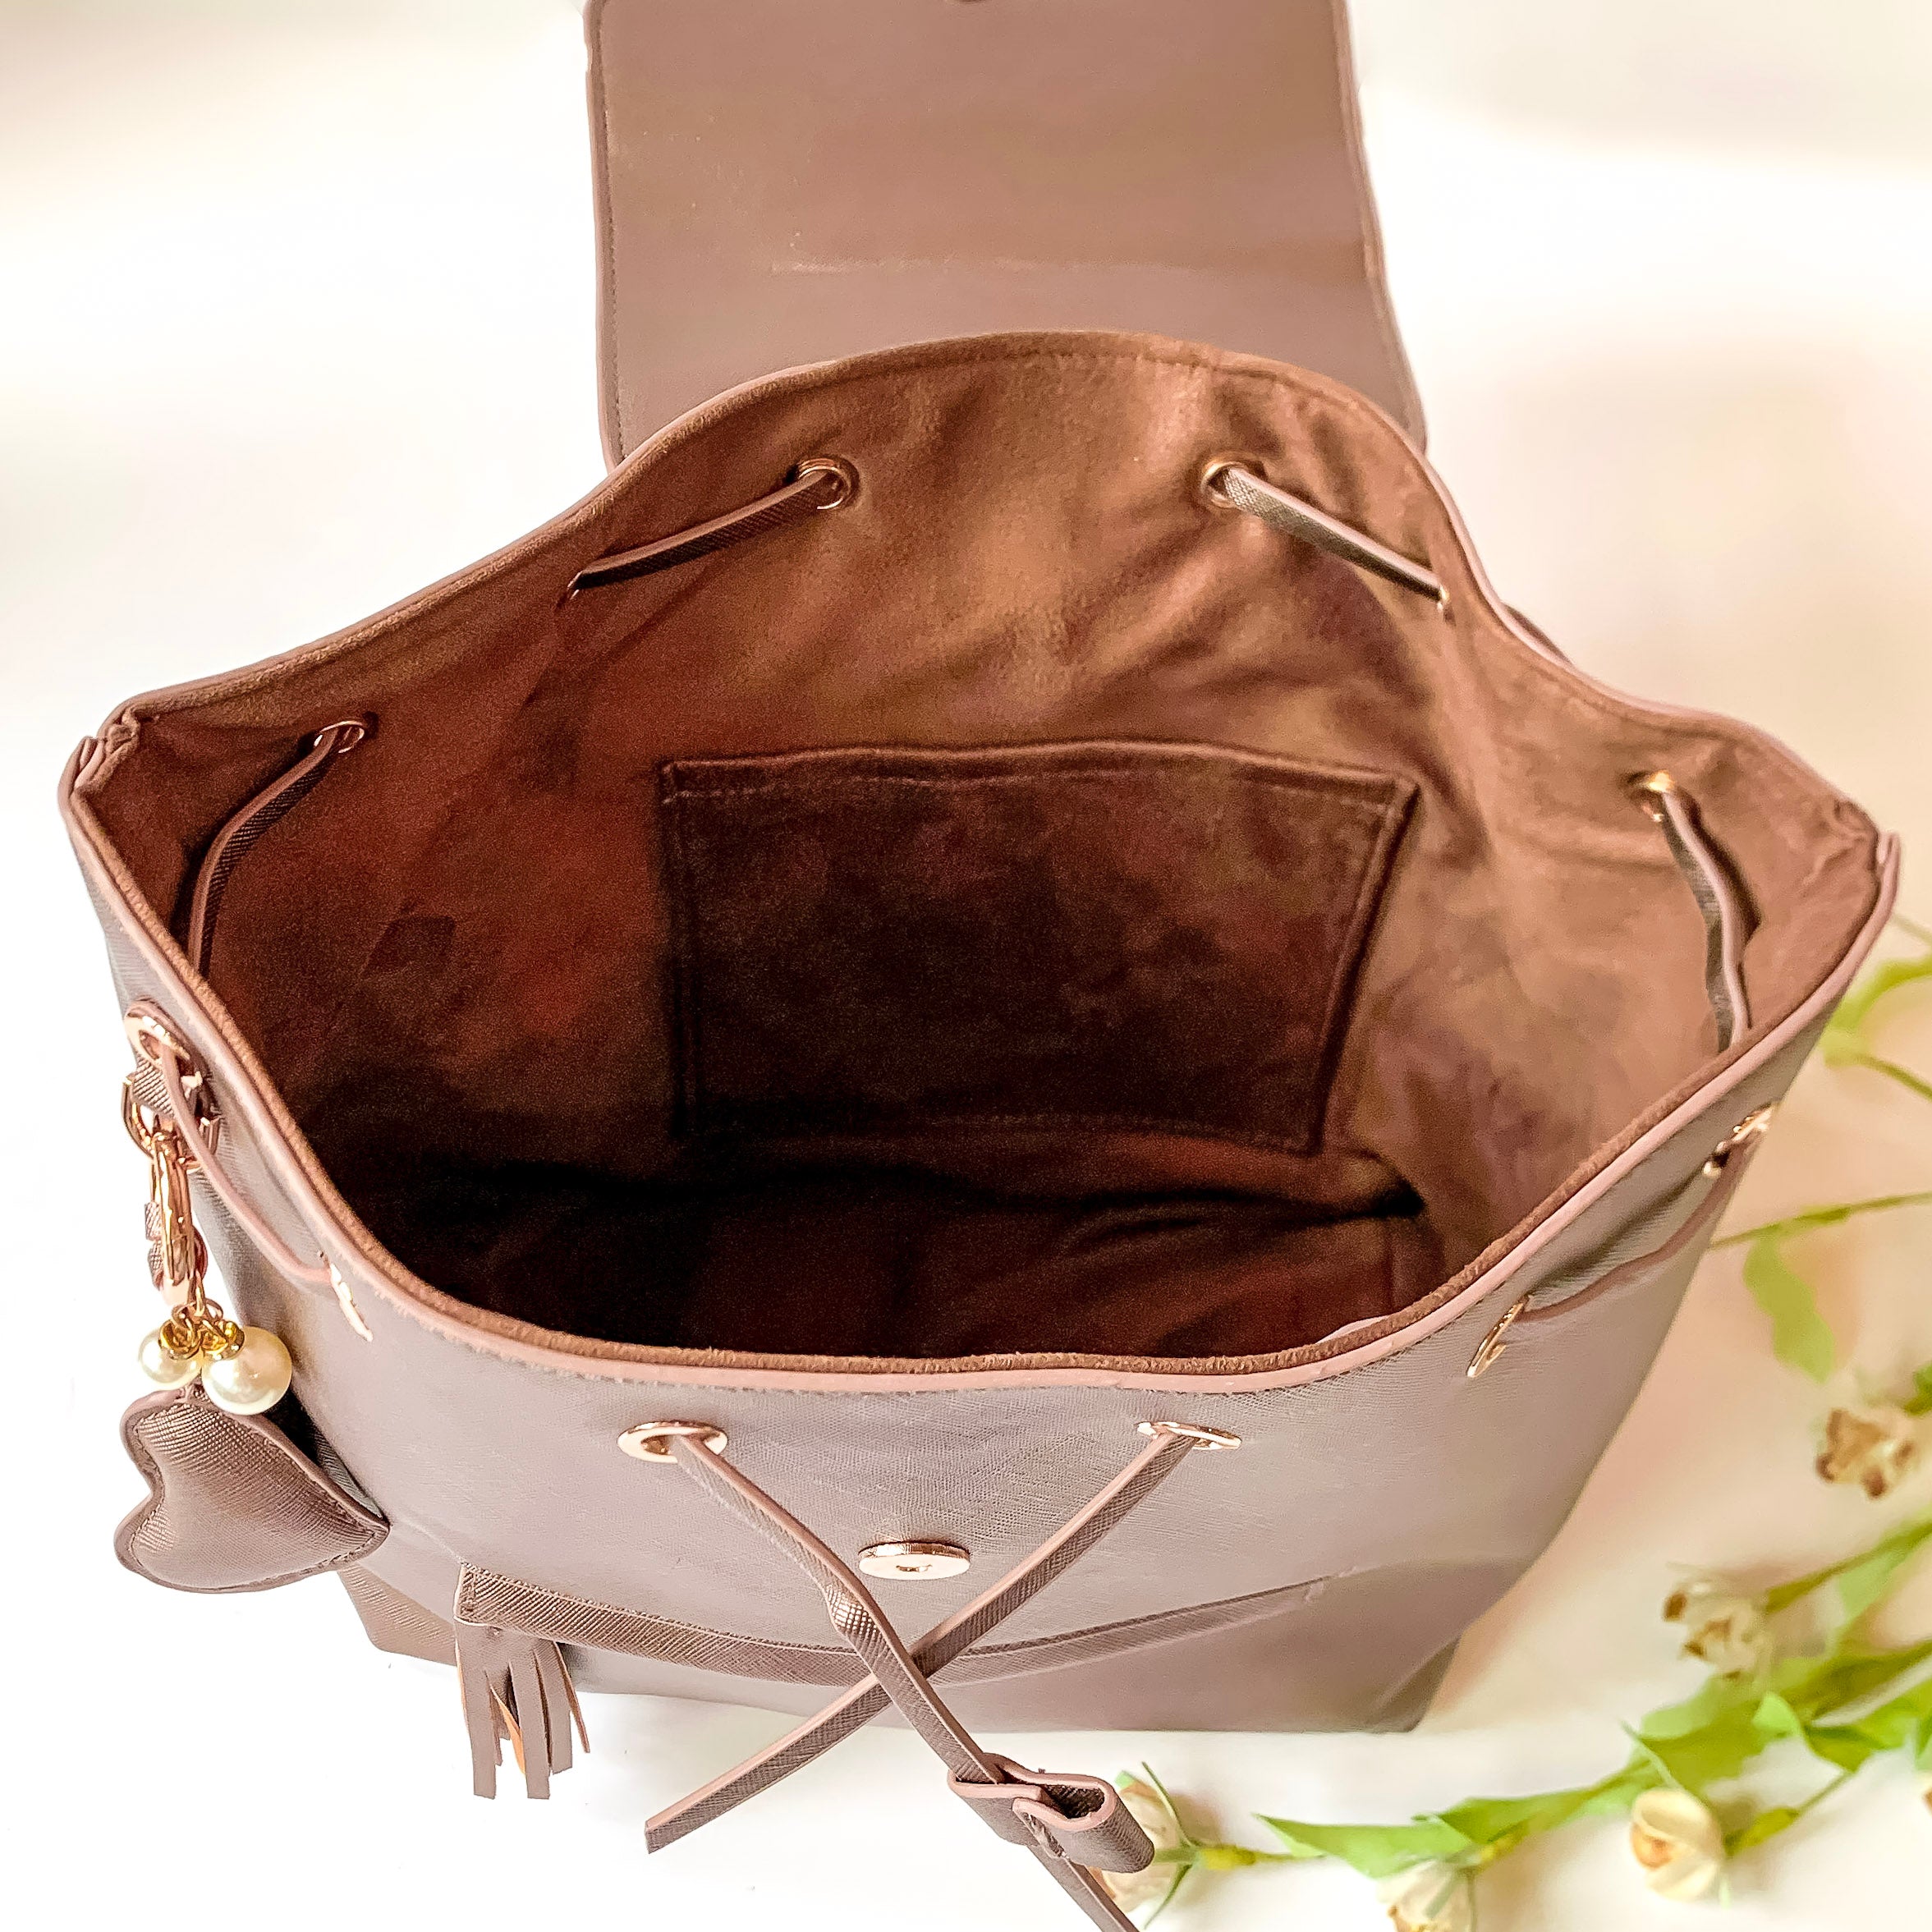 Hollis | Mini Backpack in Metallic Mocha - Giddy Up Glamour Boutique